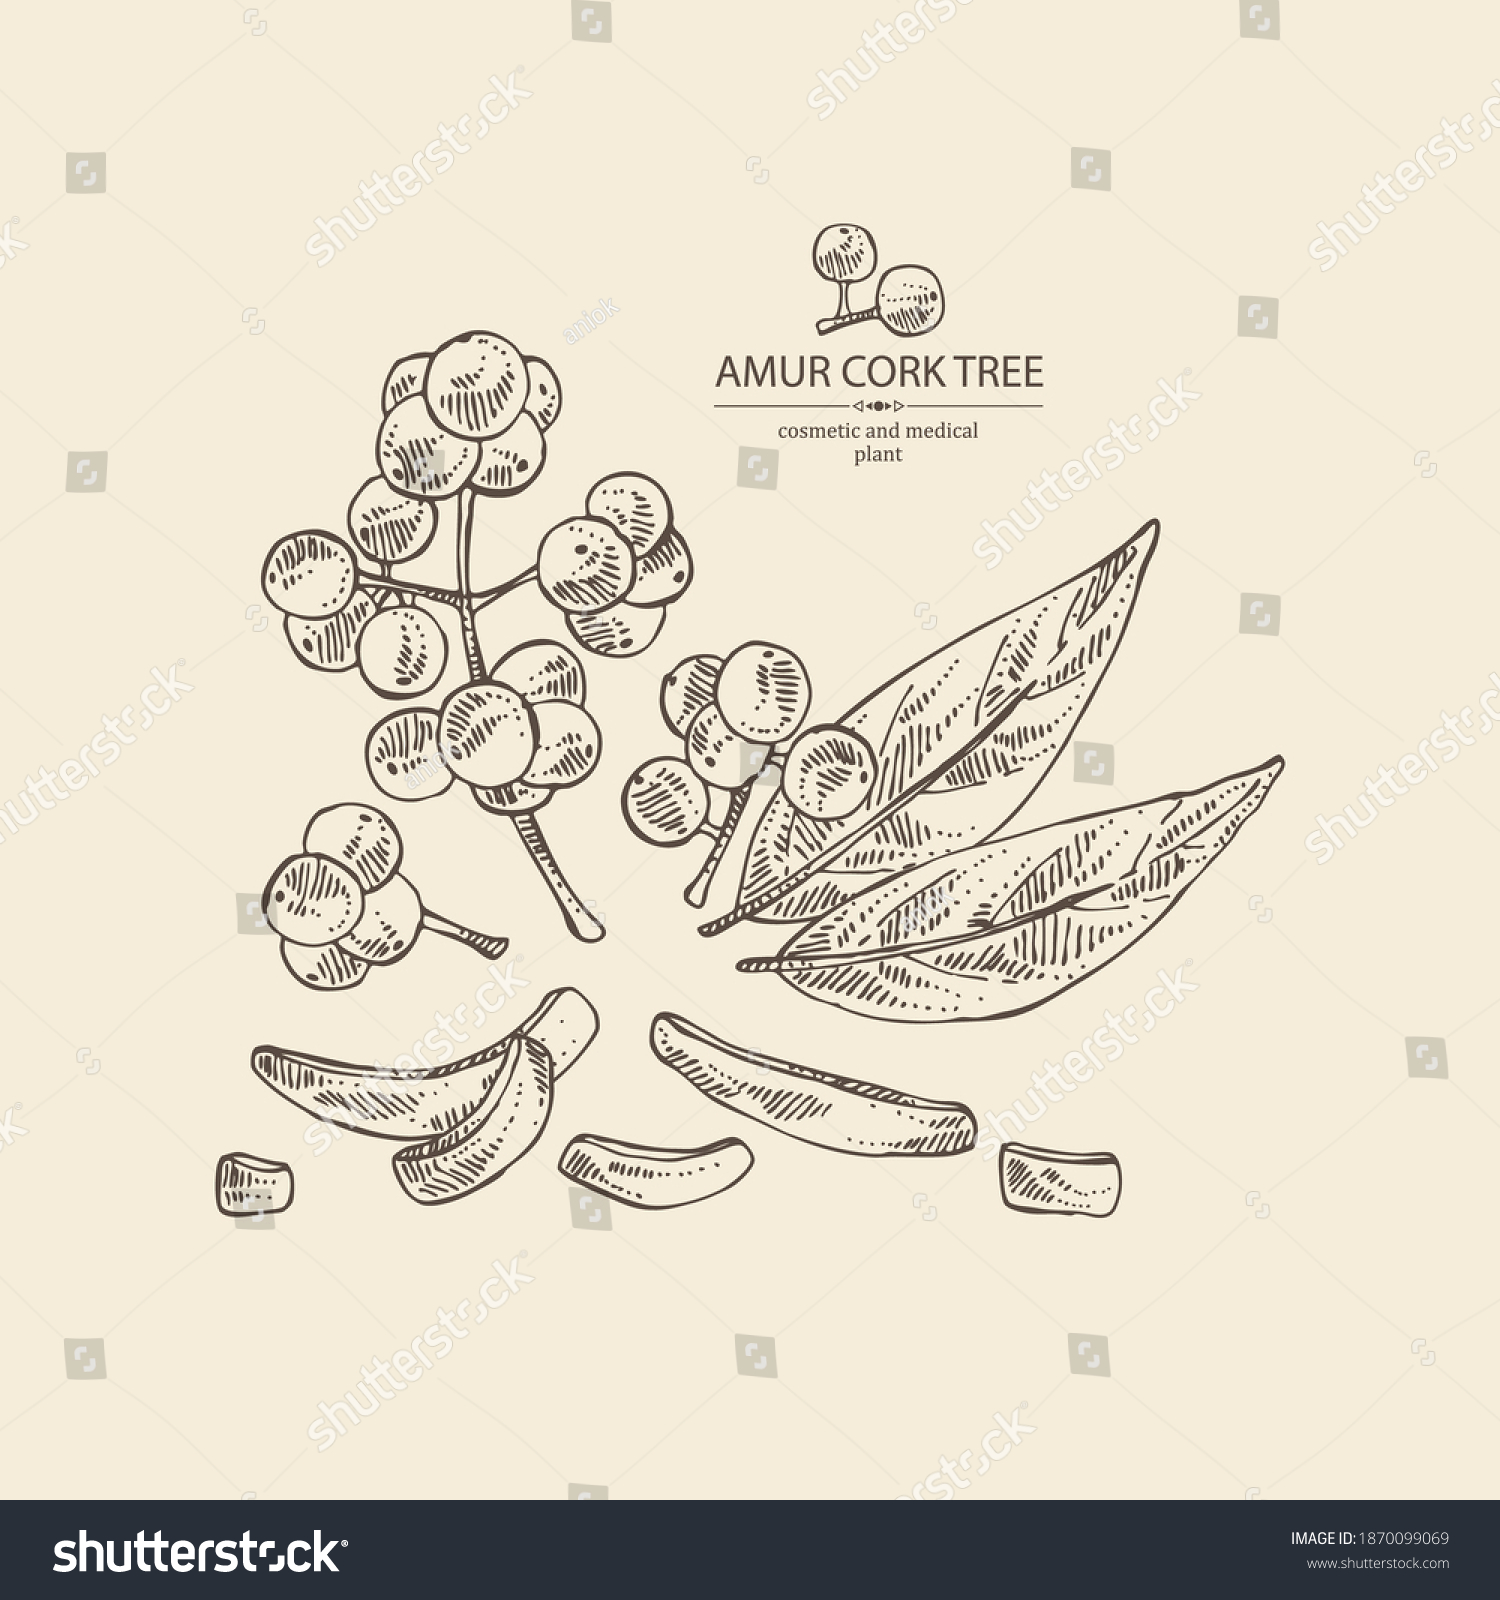 SVG of Background with amur cork tree: amur cork berries, plant and amur cork tree bark. Phellodendron amurense. Cosmetic and medical plant. Vector hand drawn illustration svg